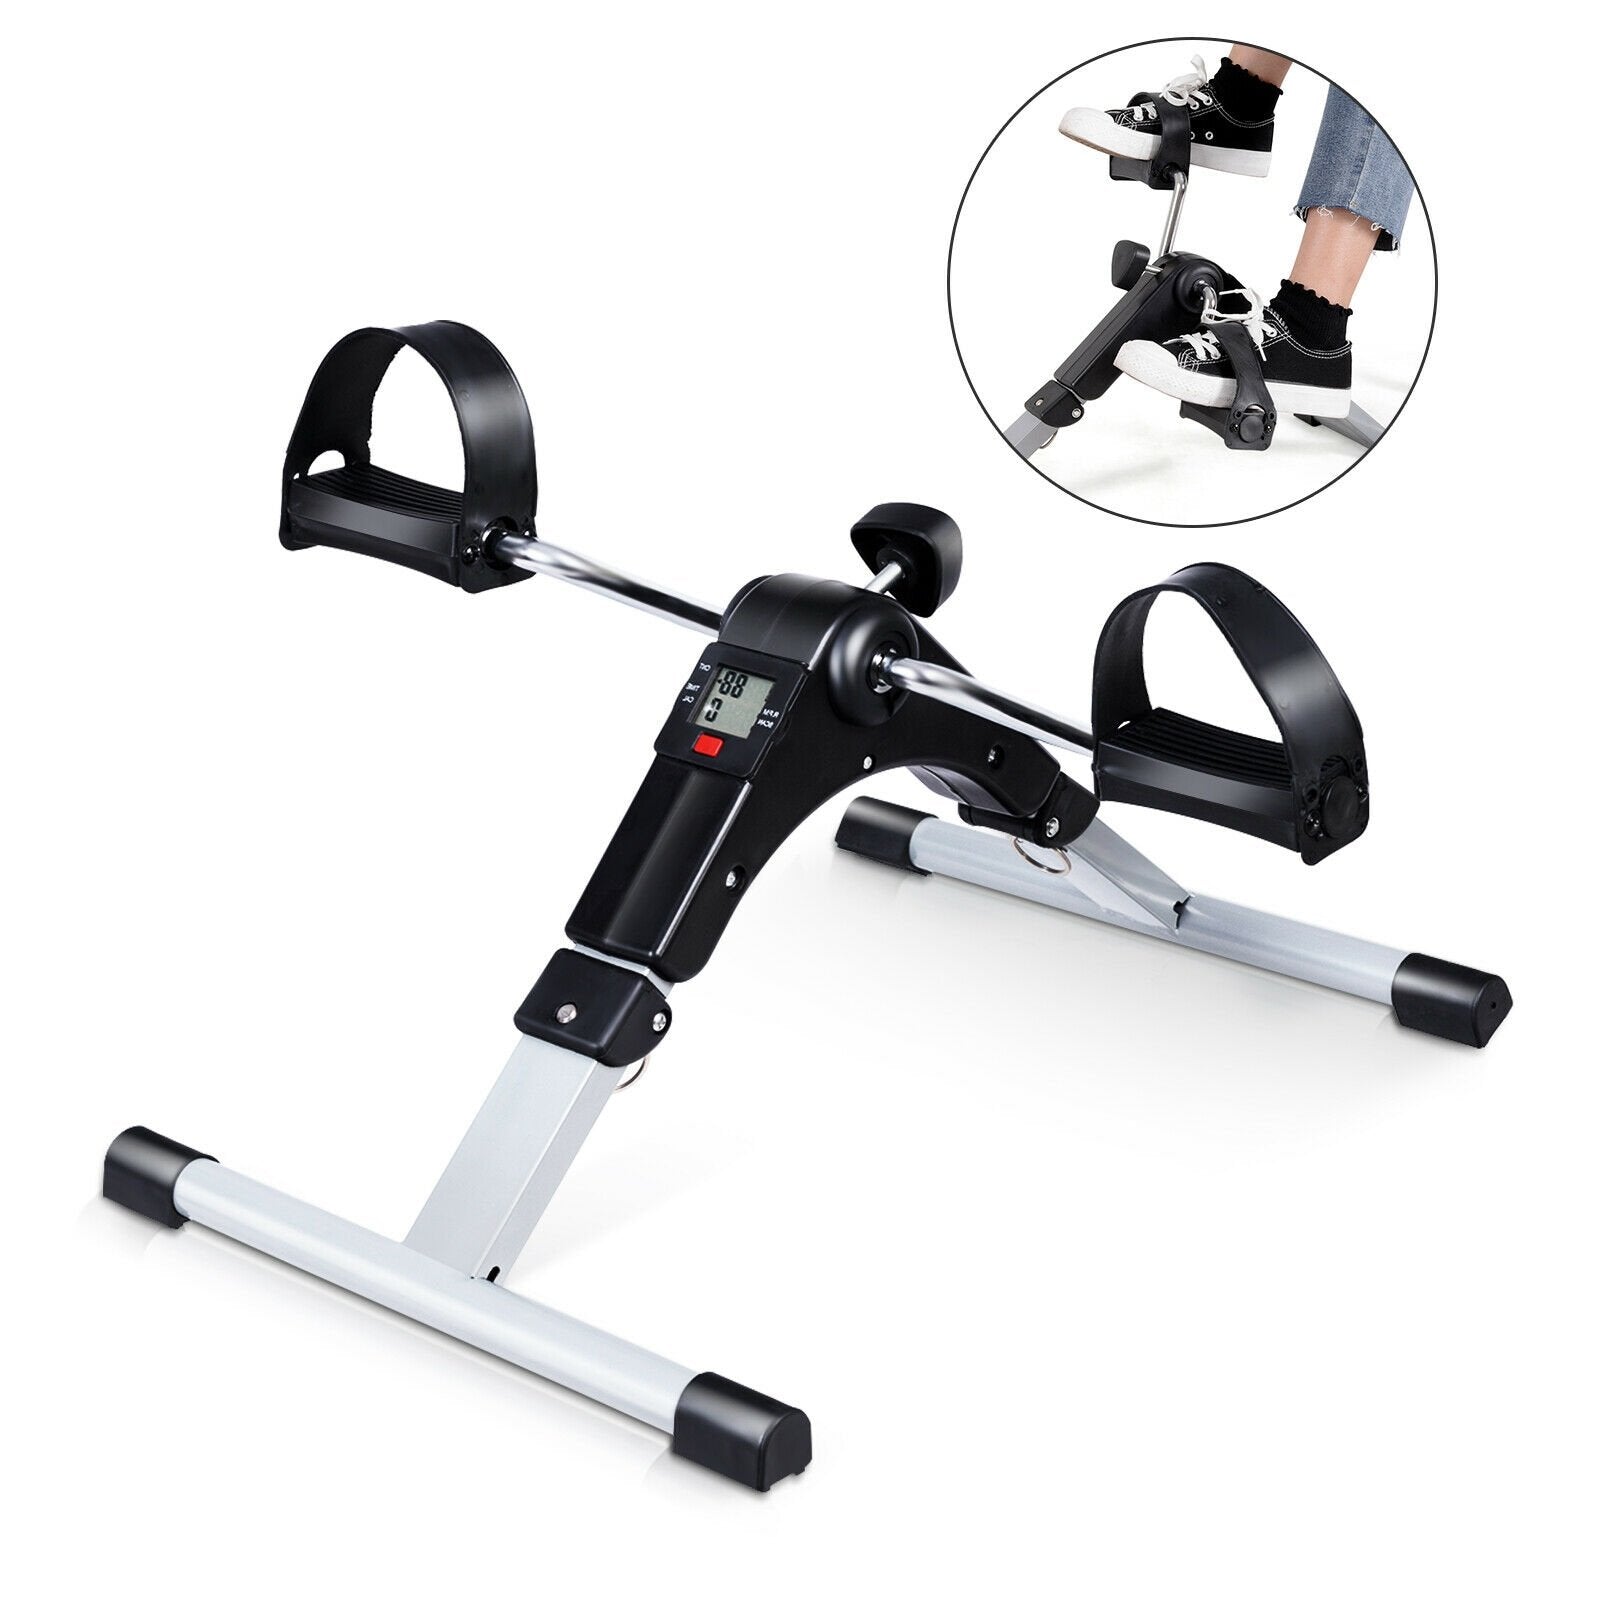 Folding Under Desk Indoor Pedal Exercise Bike for Arms Legs, Black at Gallery Canada